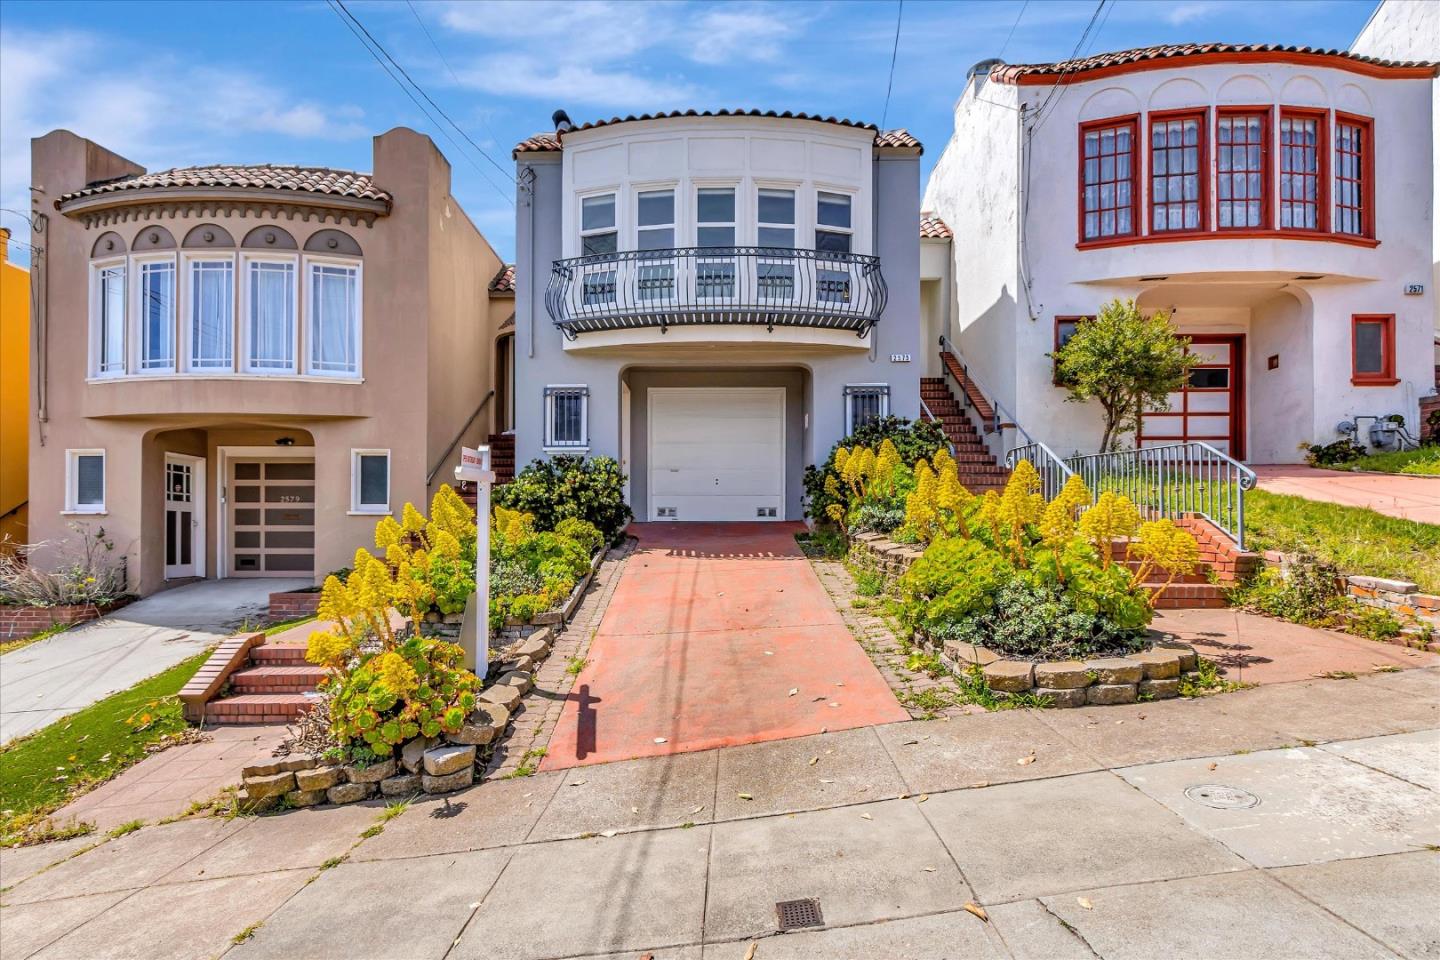 Photo of 2575 14th Ave in San Francisco, CA